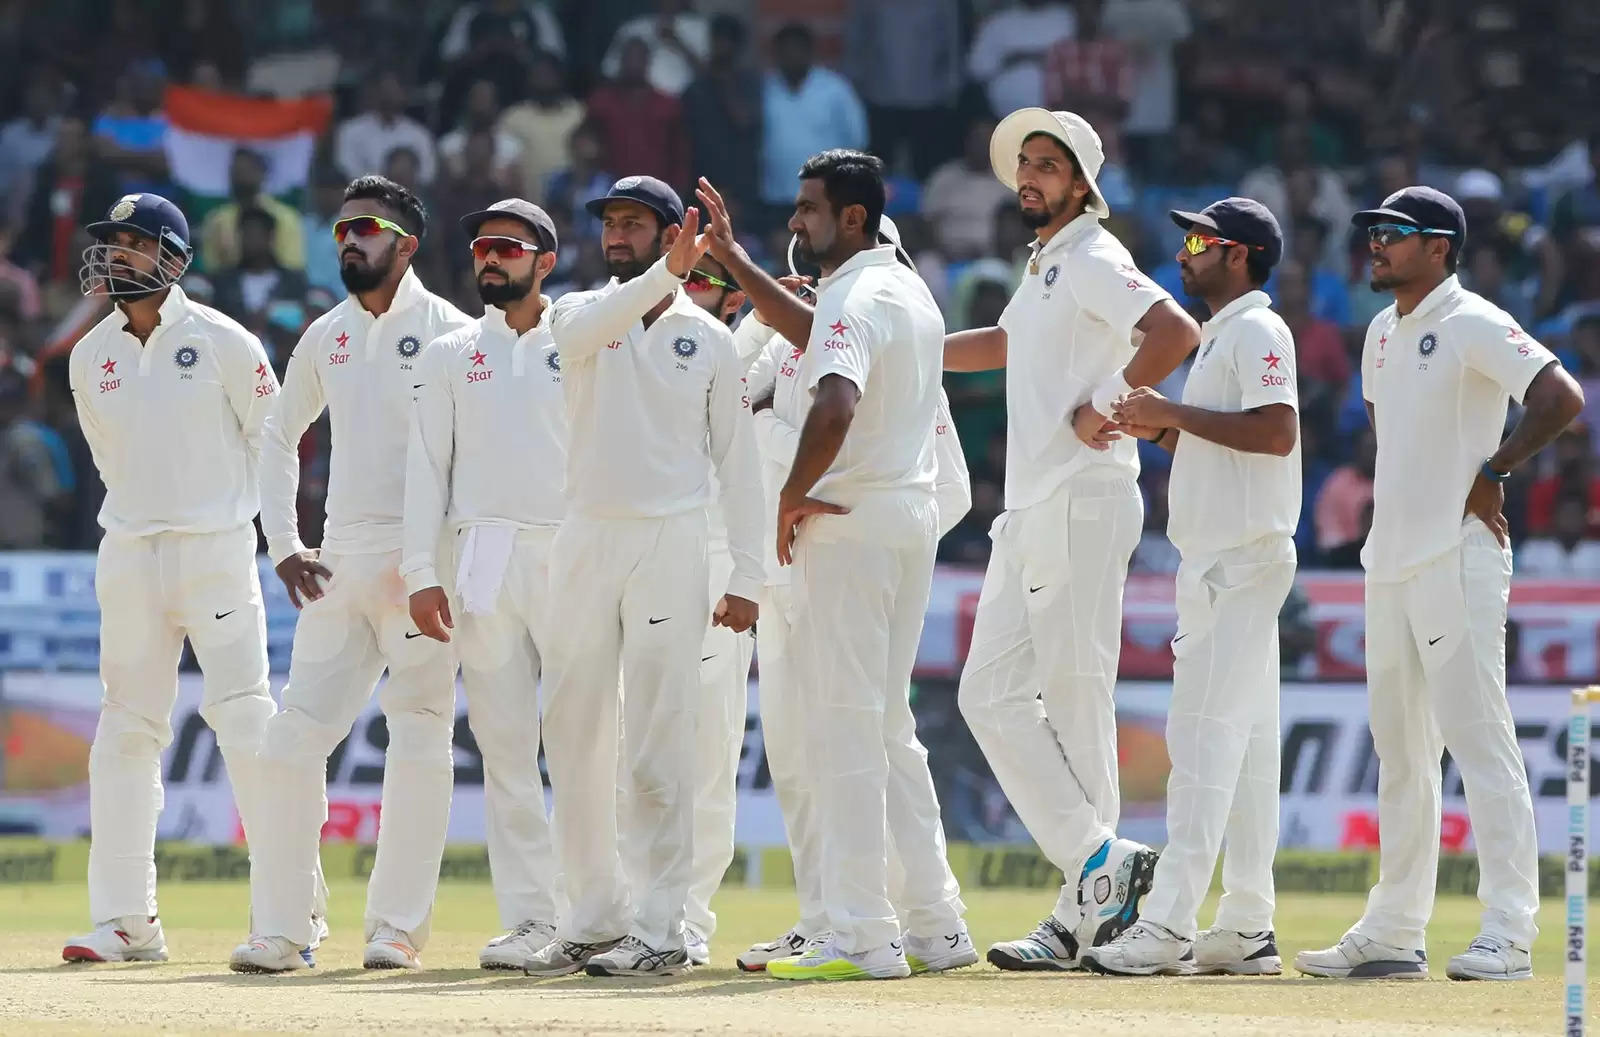 Day-Night Test: A look at how Indian cricketers have fared in pink-ball cricket